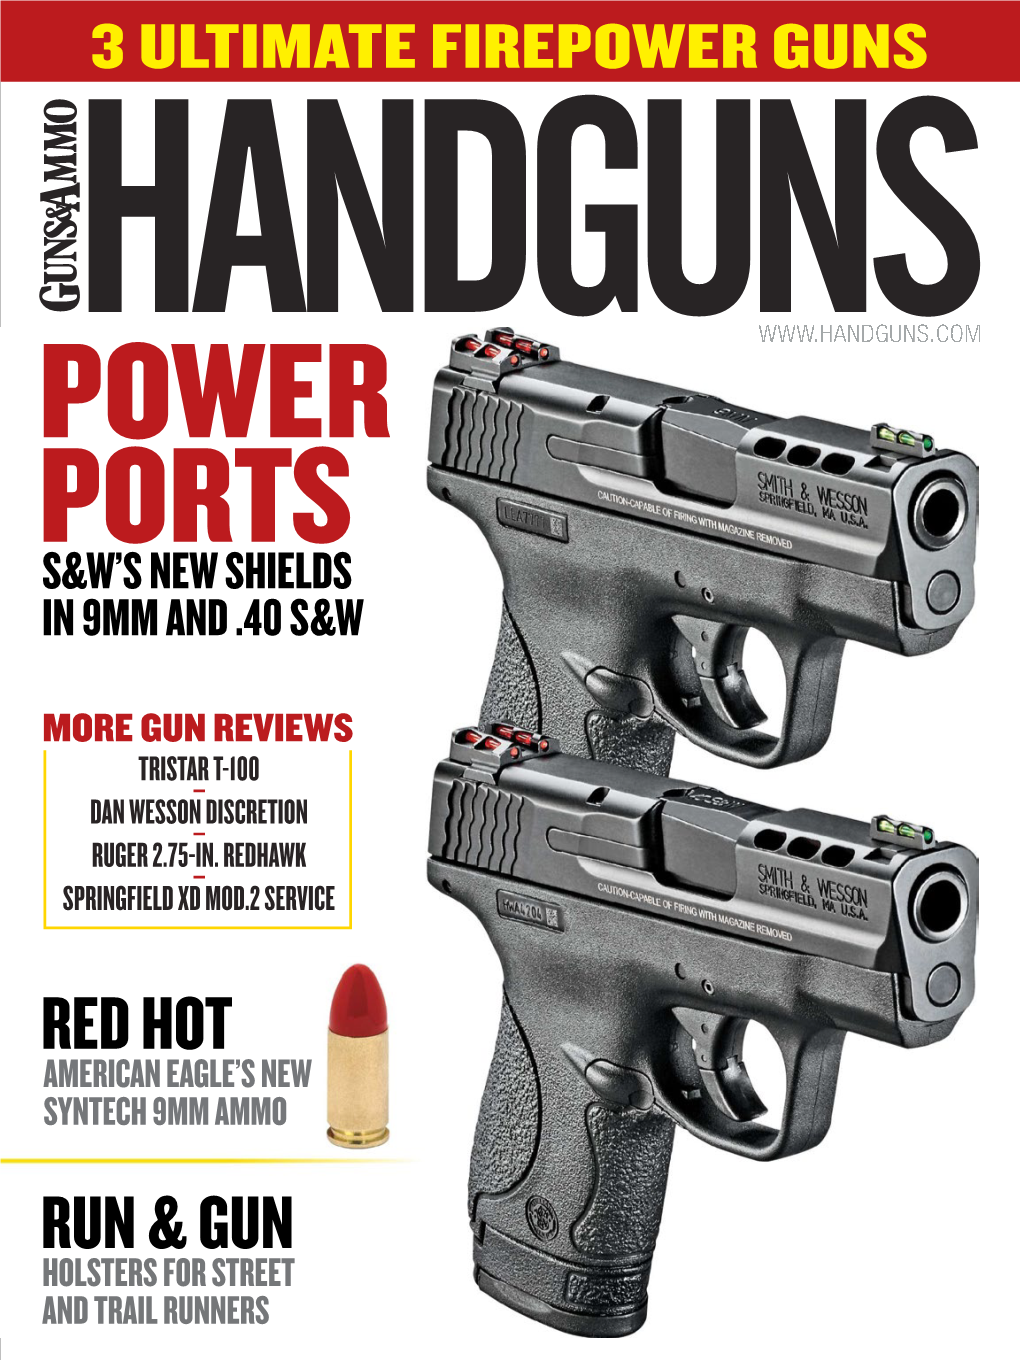 Handguns.Com Ports S&W’S New Shields in 9Mm and .40 S&W